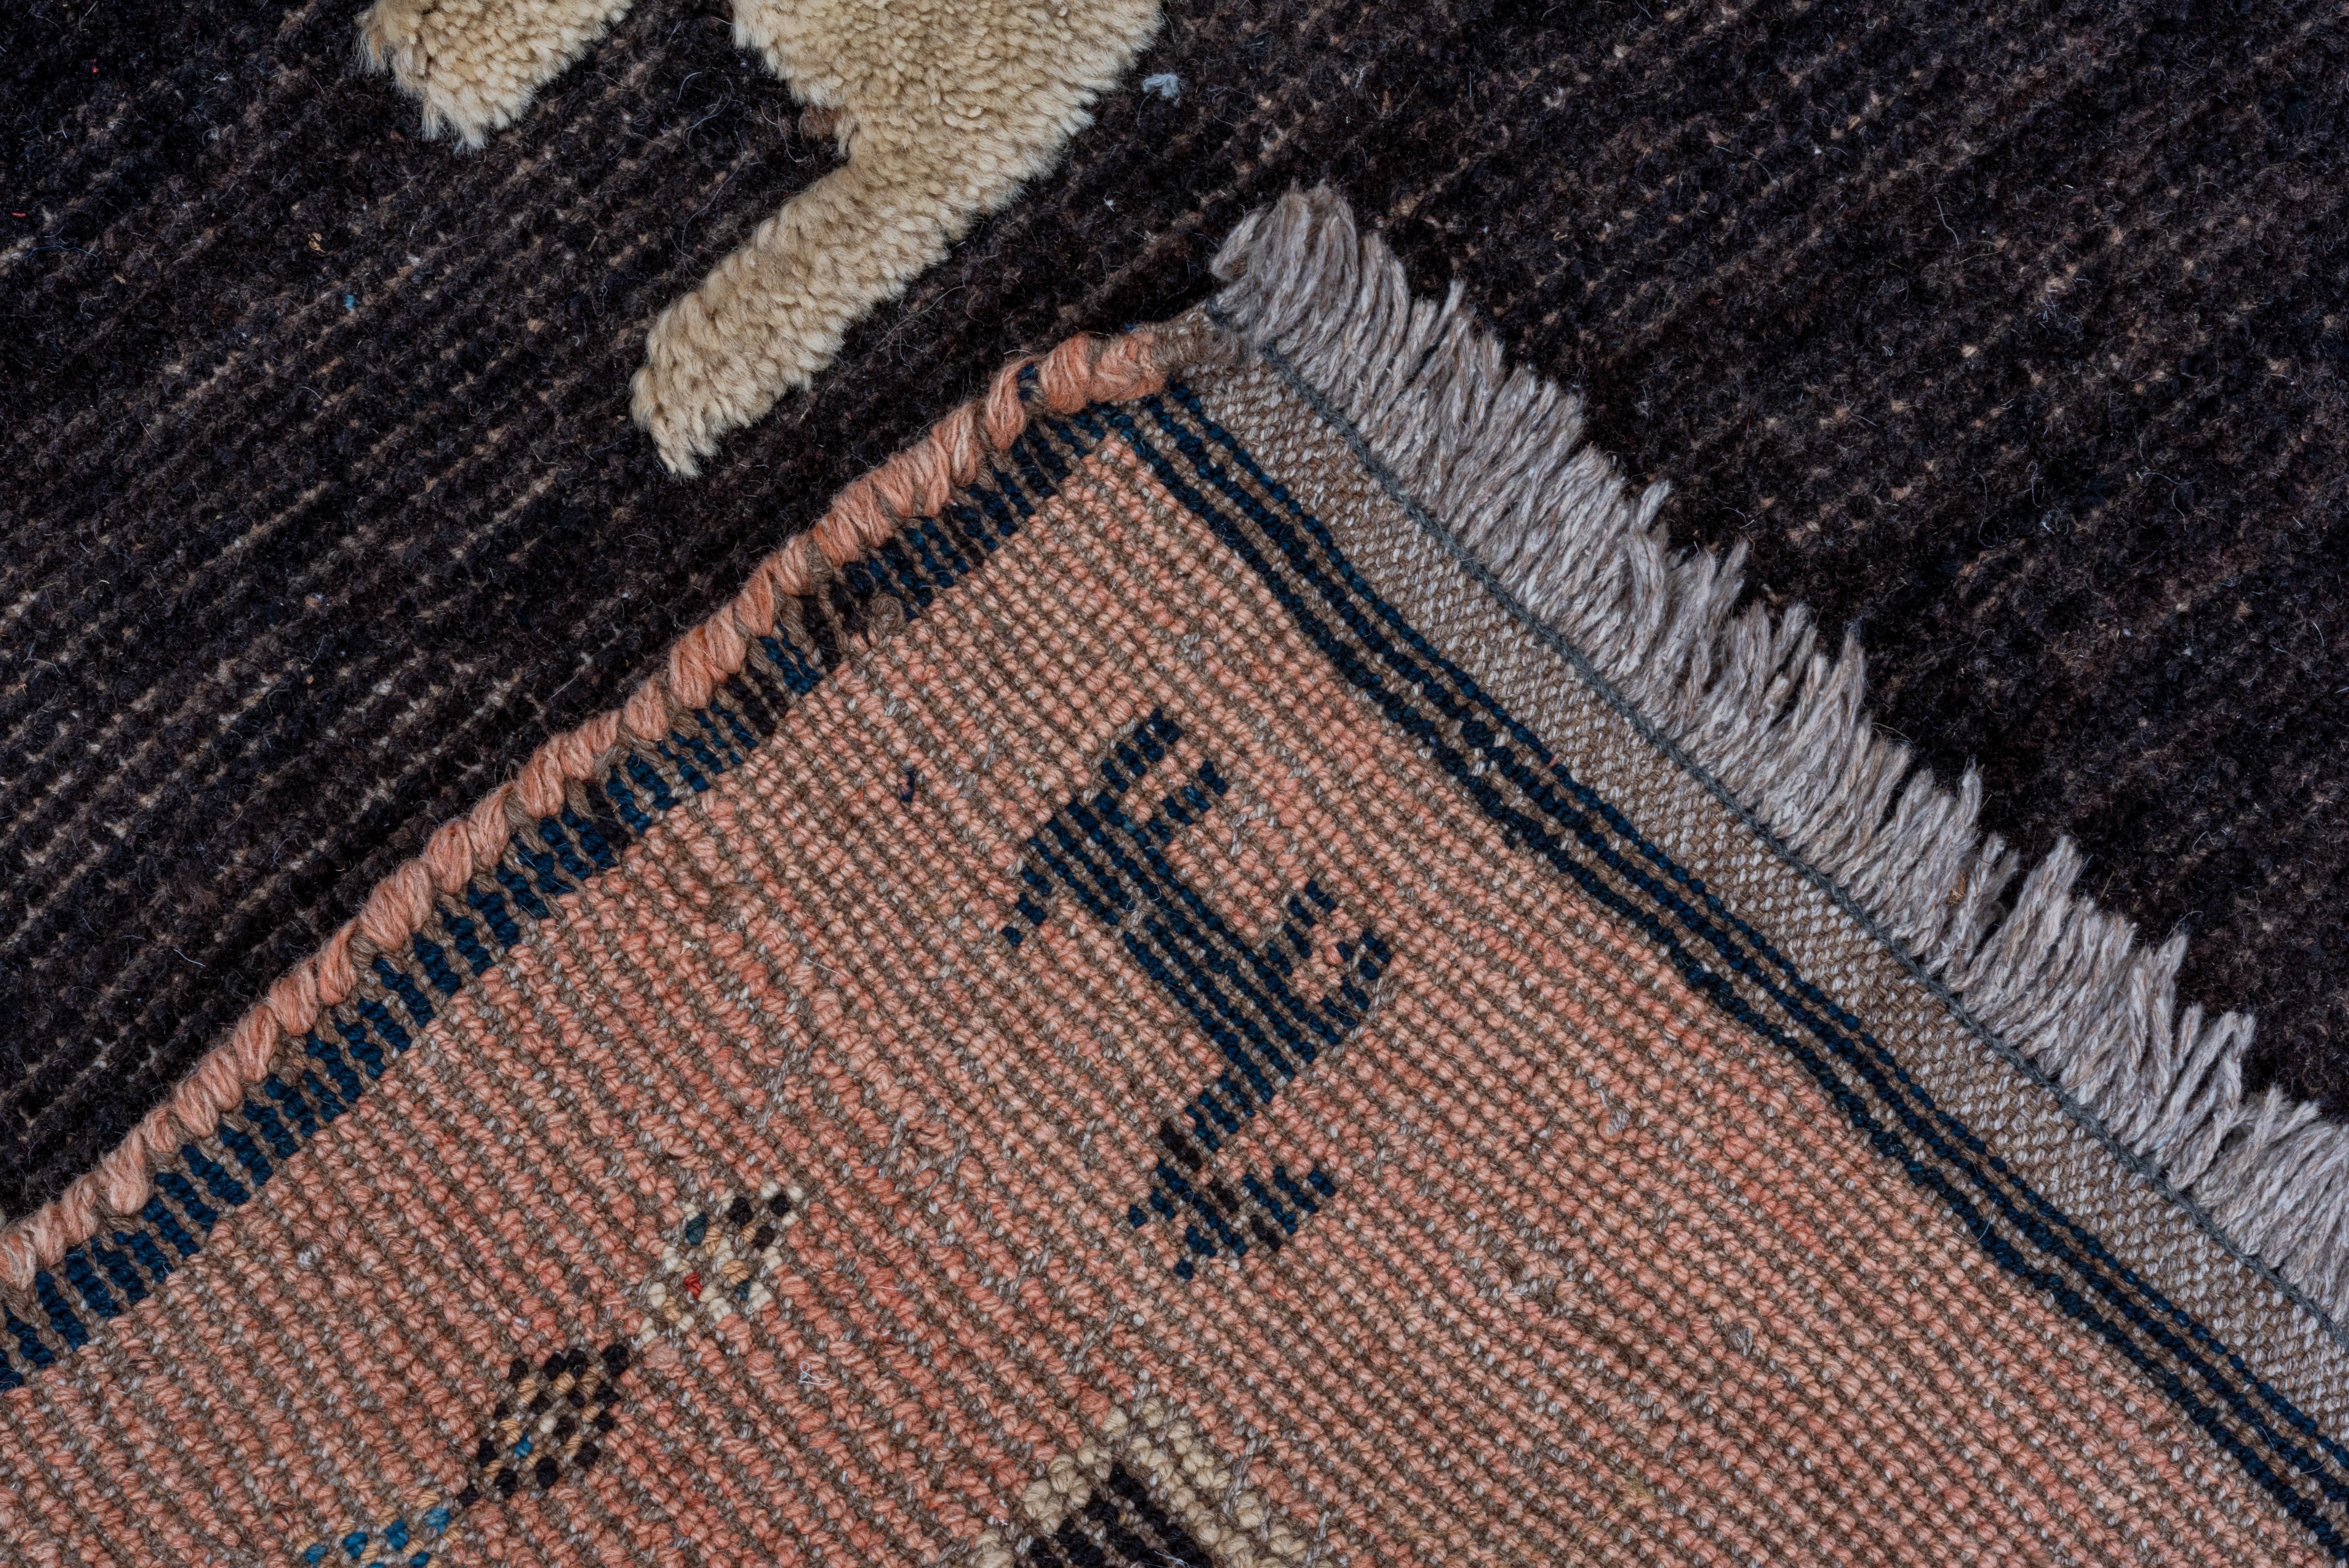 Tribal Mid-20th Century Pictorial Persian Gabbeh Rug, Charcoal Field, Peach Borders For Sale